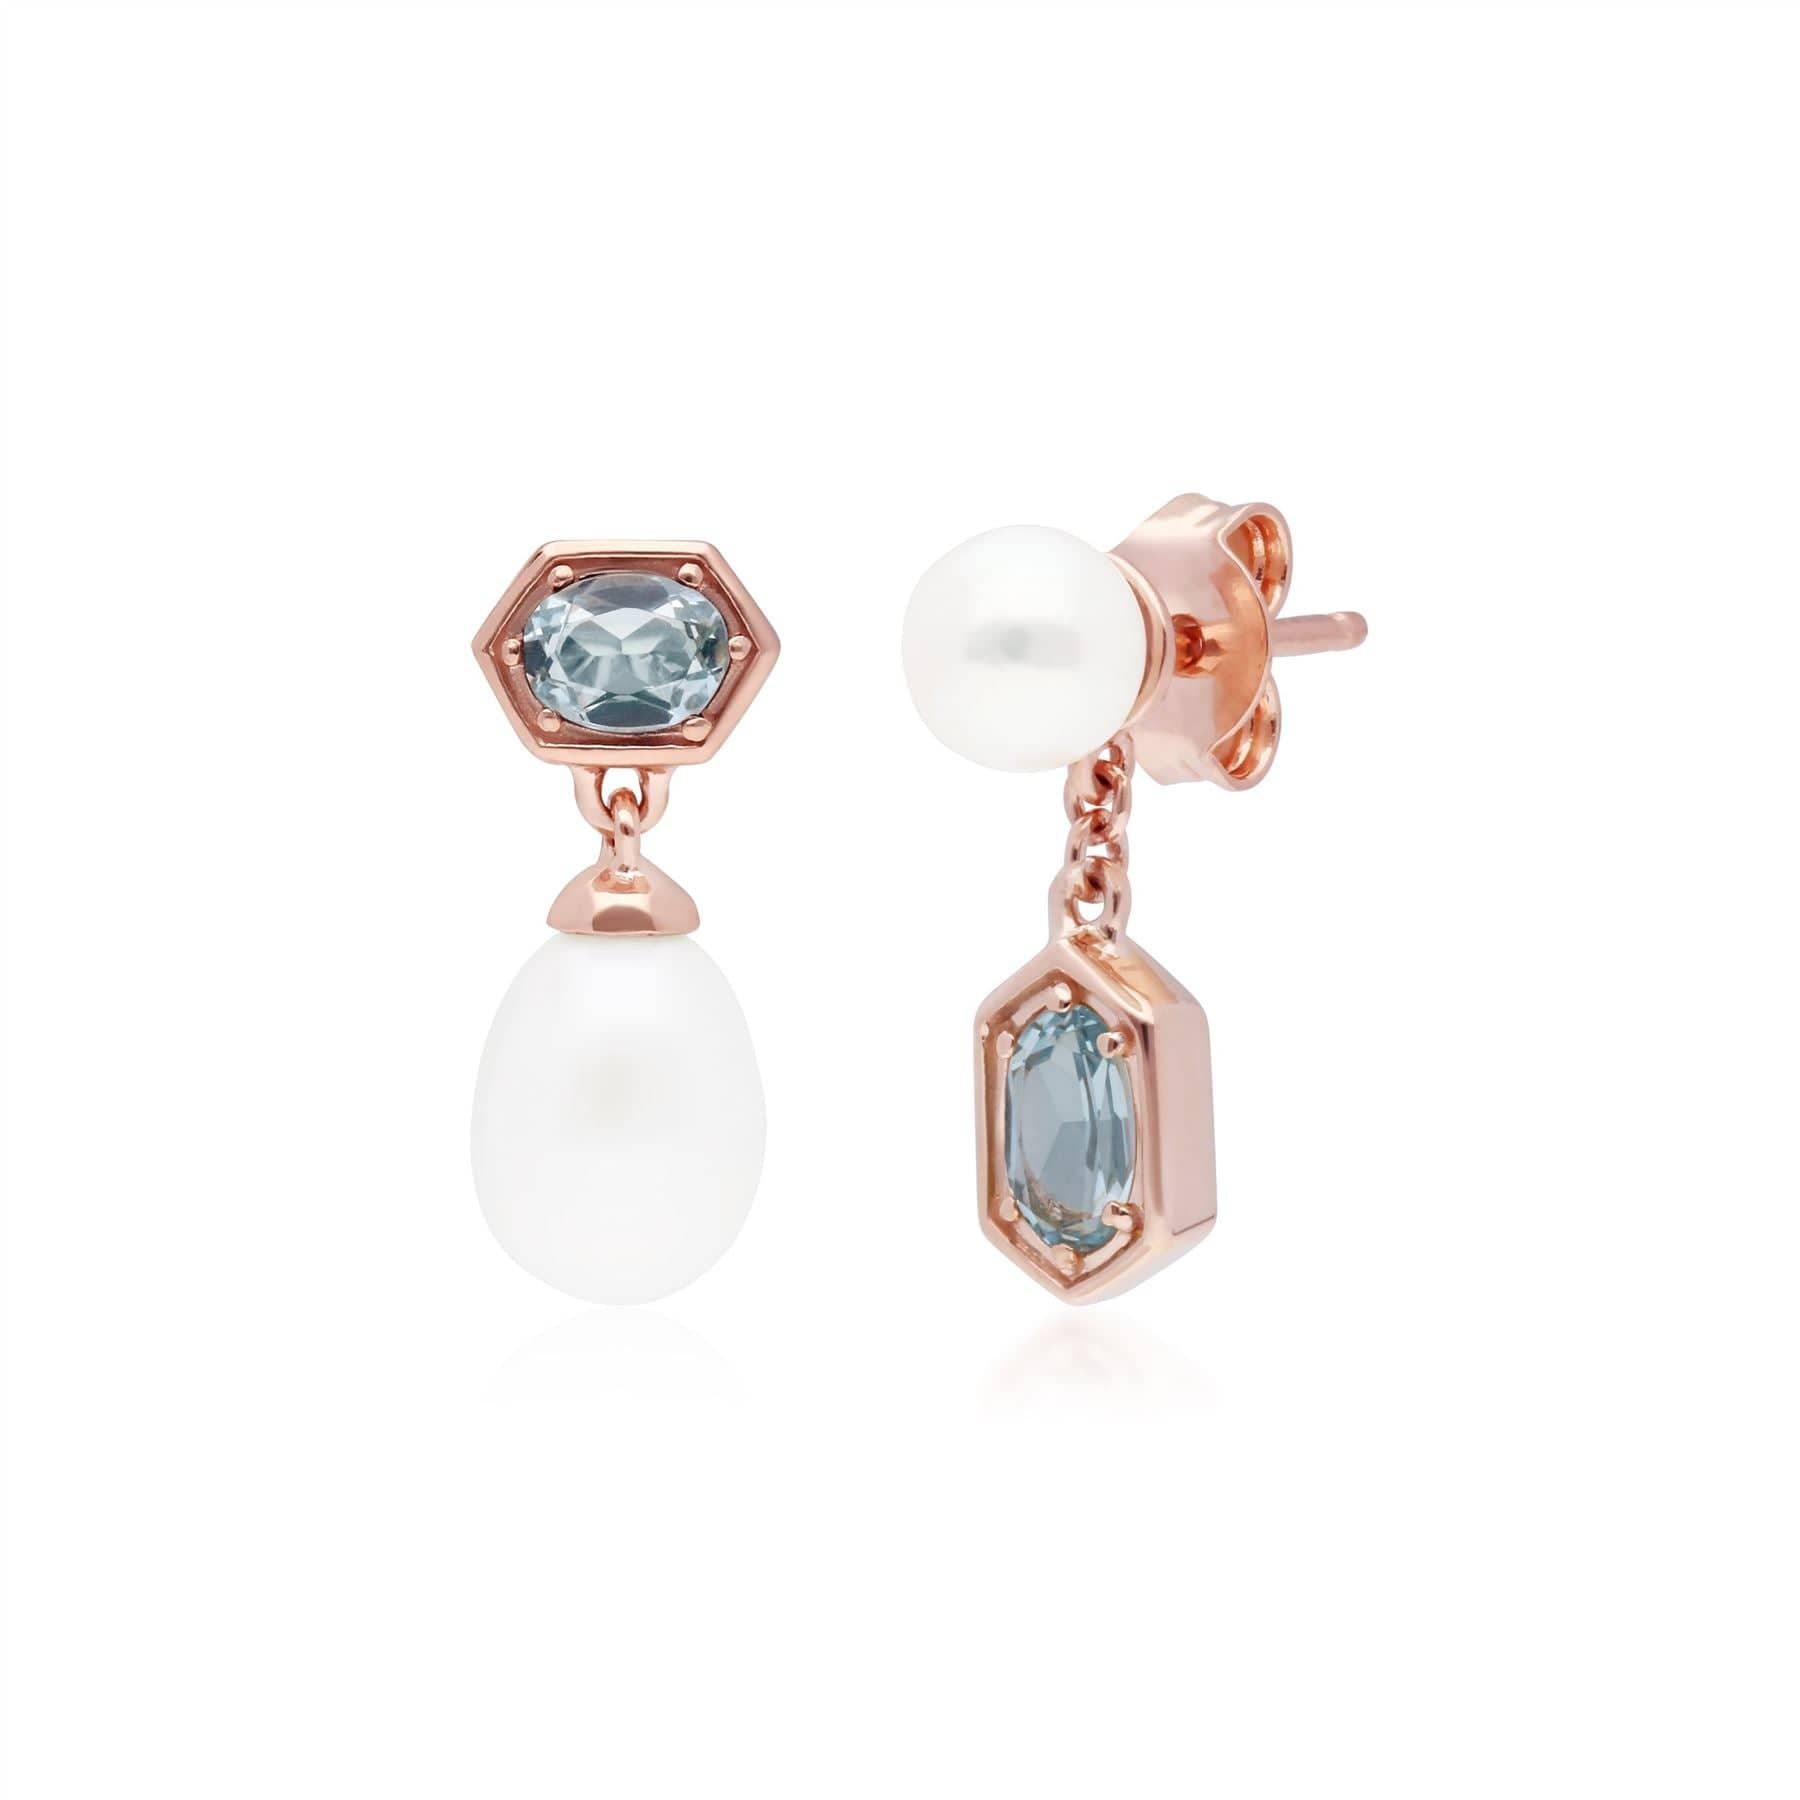 Modern Pearl & Blue Topaz Mismatched Drop Earrings in Rose Gold Plated Sterling Silver